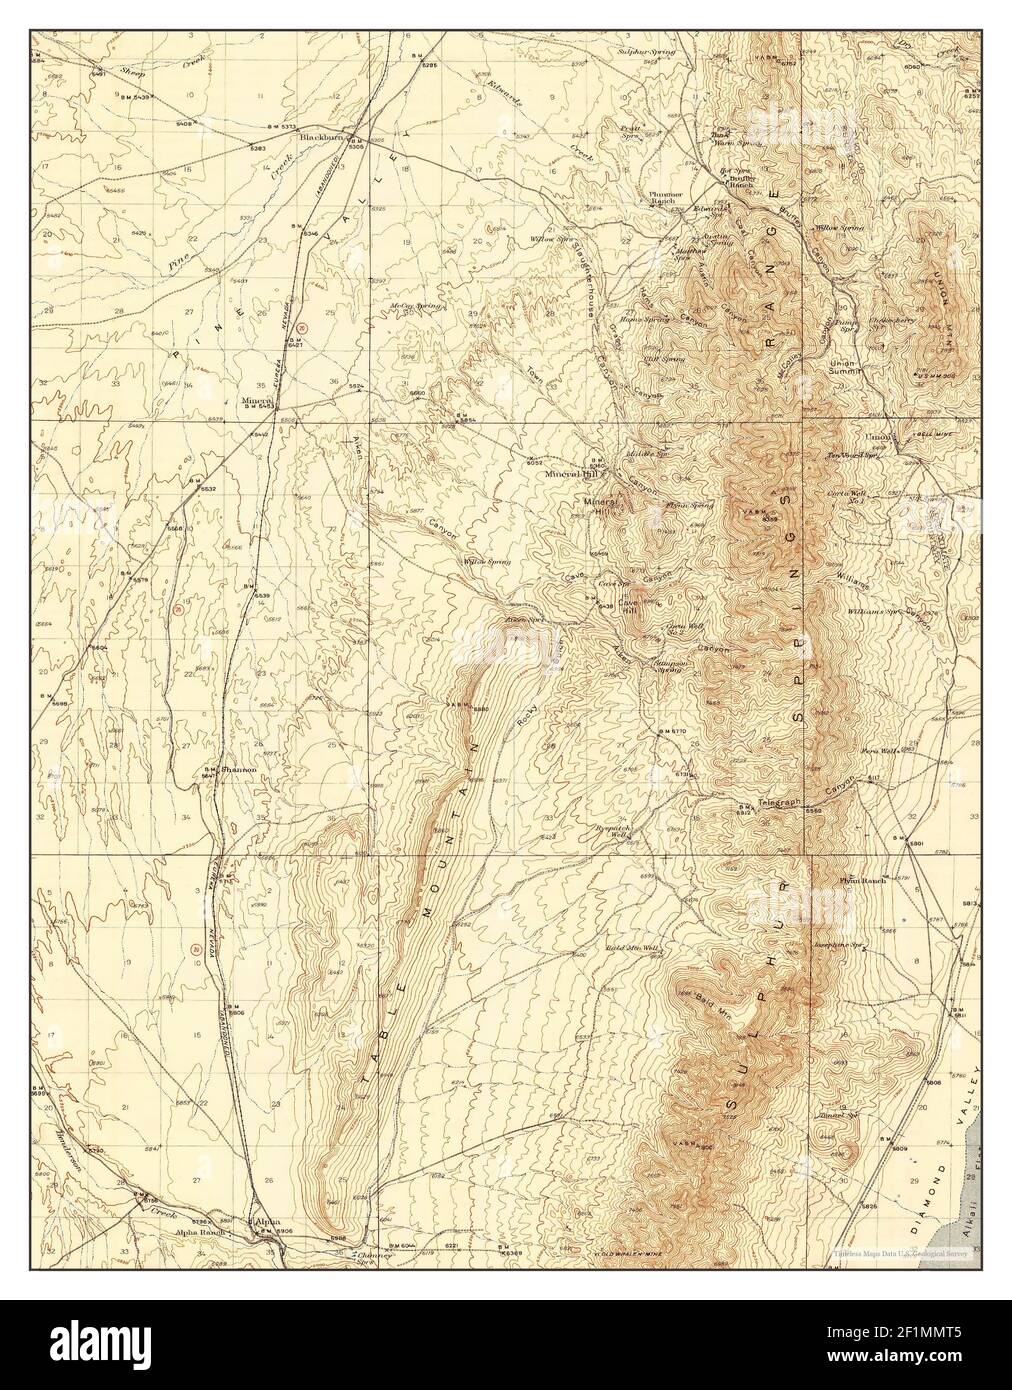 Mineral Hill, Nevada, map 1943, 1:62500, United States of America by Timeless Maps, data U.S. Geological Survey Foto Stock